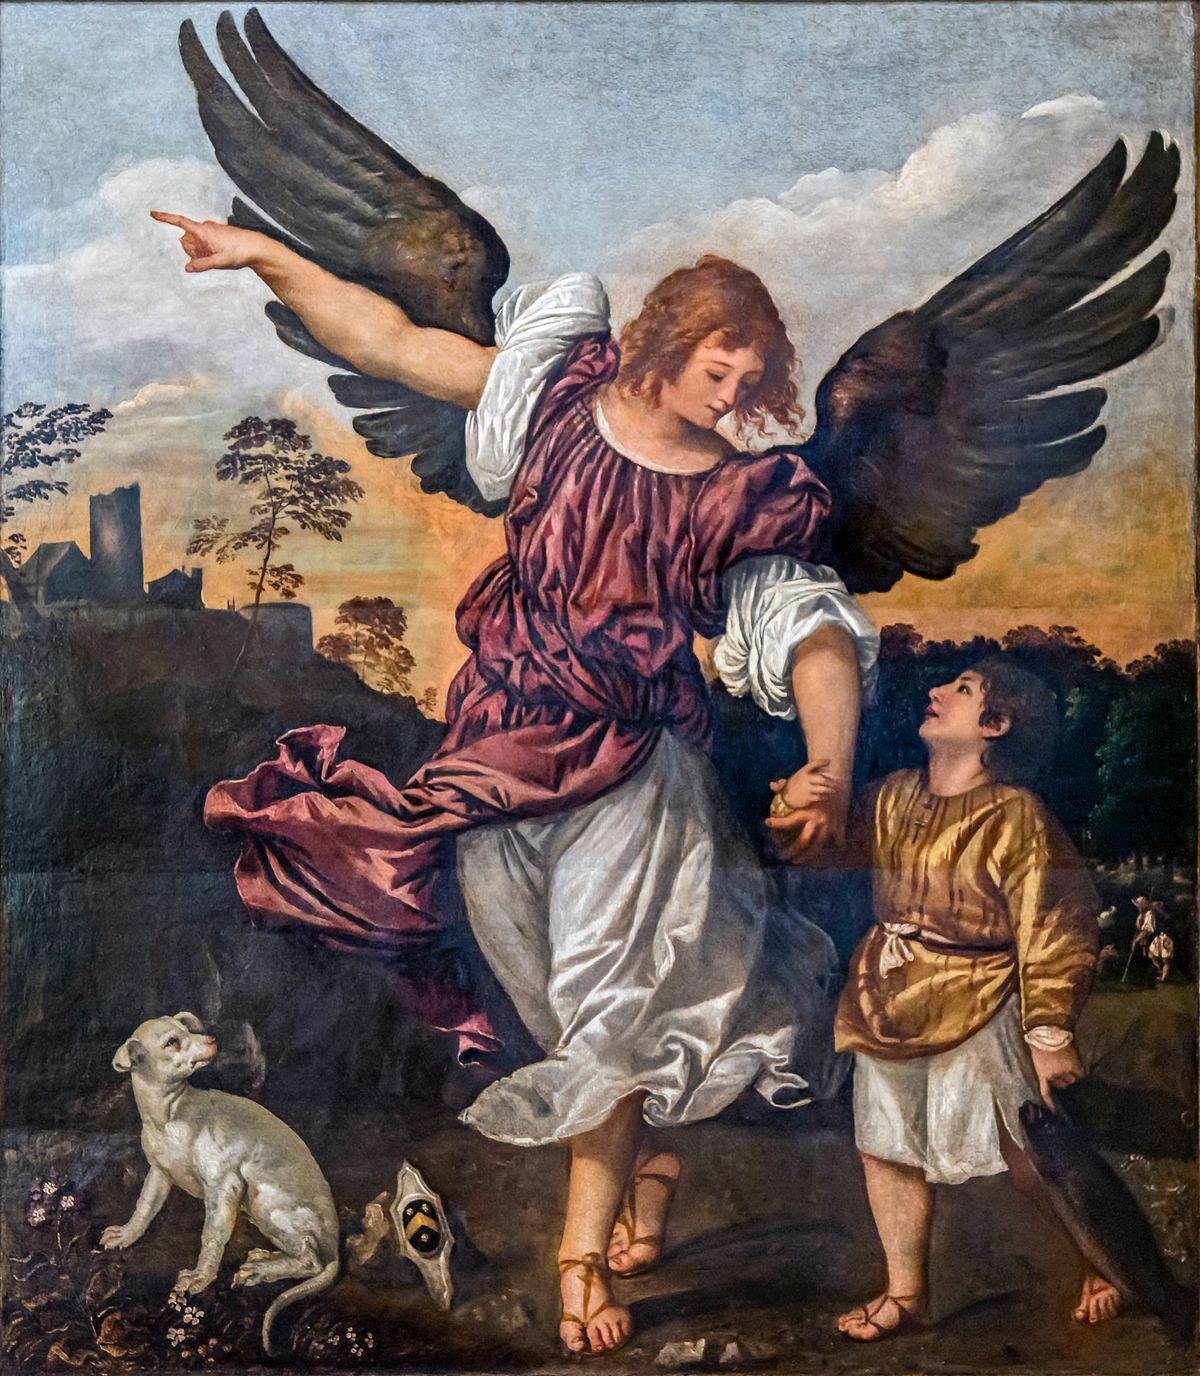 Raphael and Tobit by Titian - Public Domain Catholic Painting